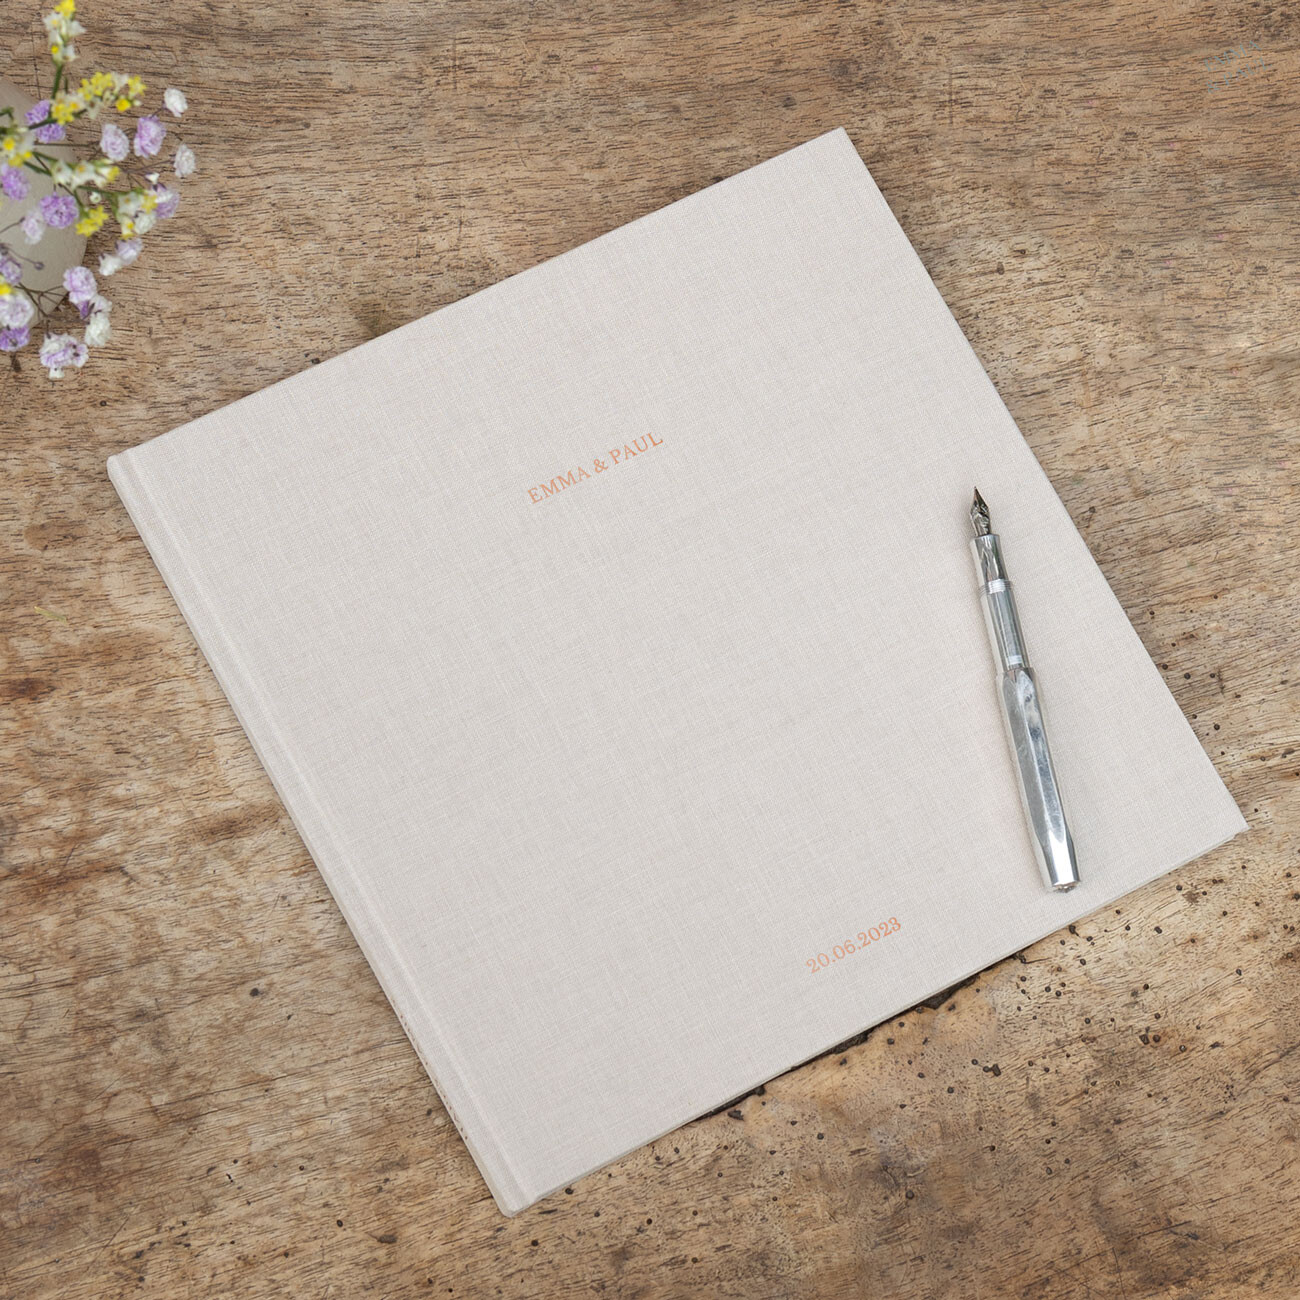 Personalised wedding guest books